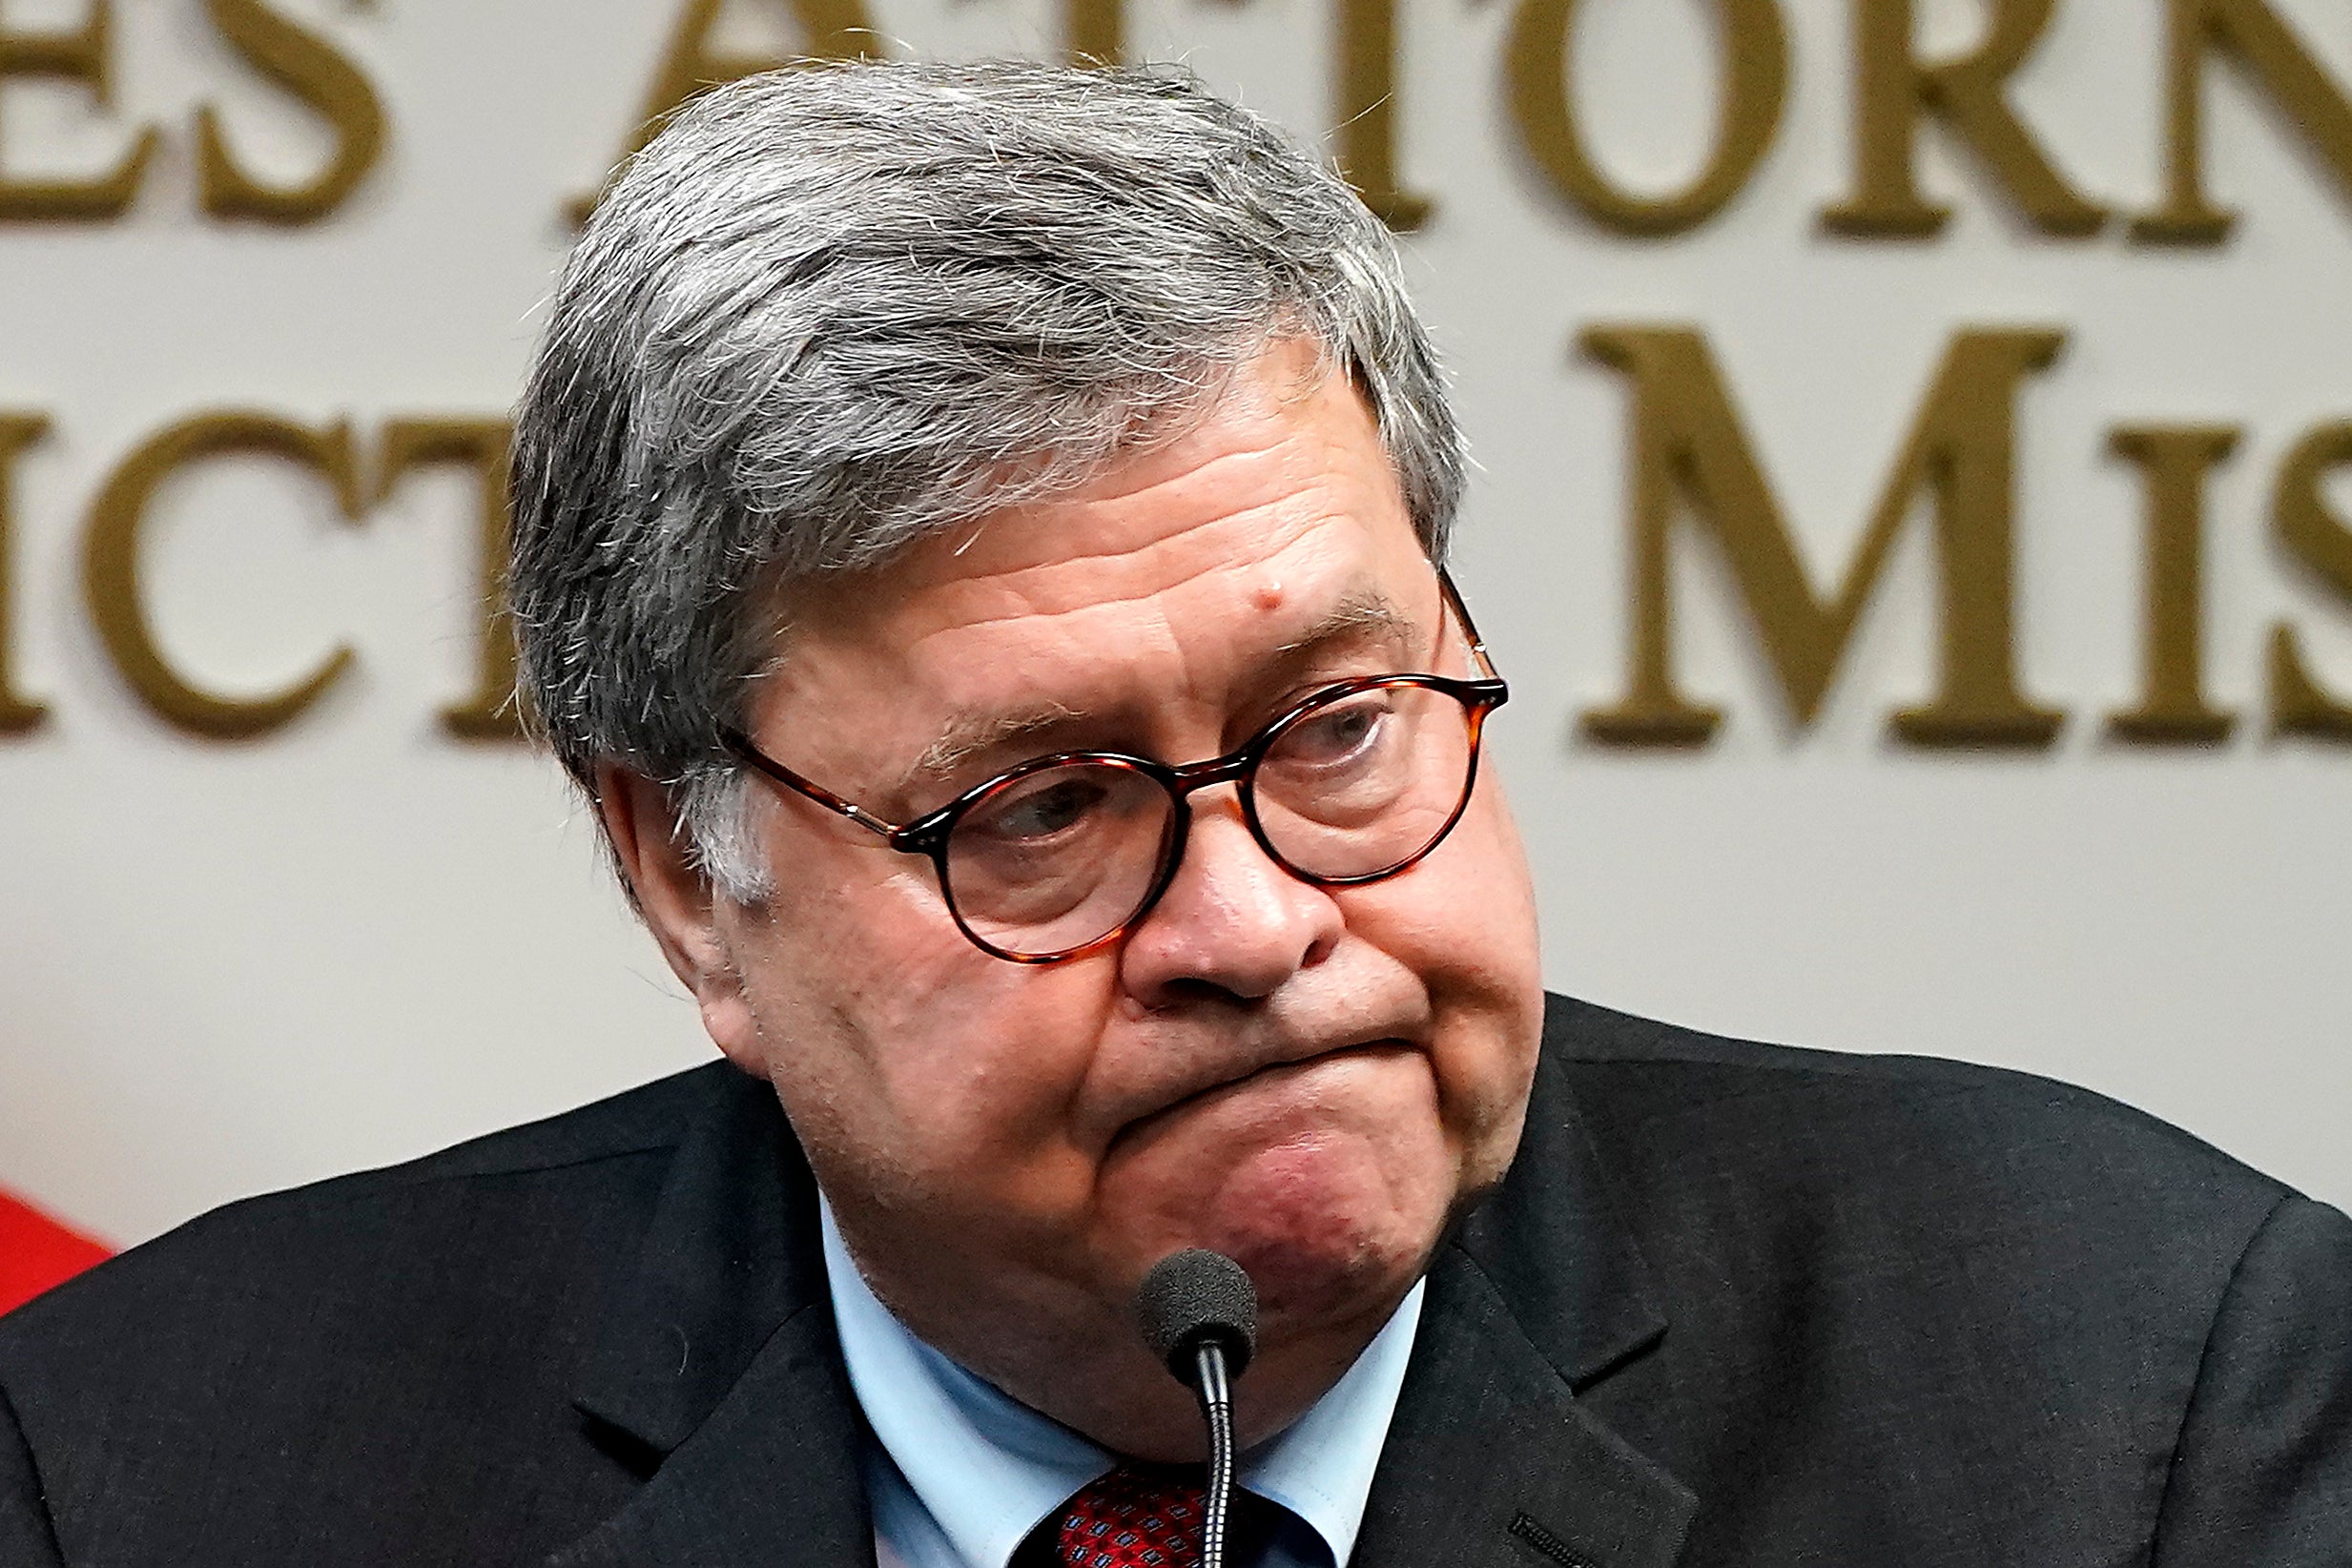 Attorney General William Barr often echoed Donald Trump. But not often enough.